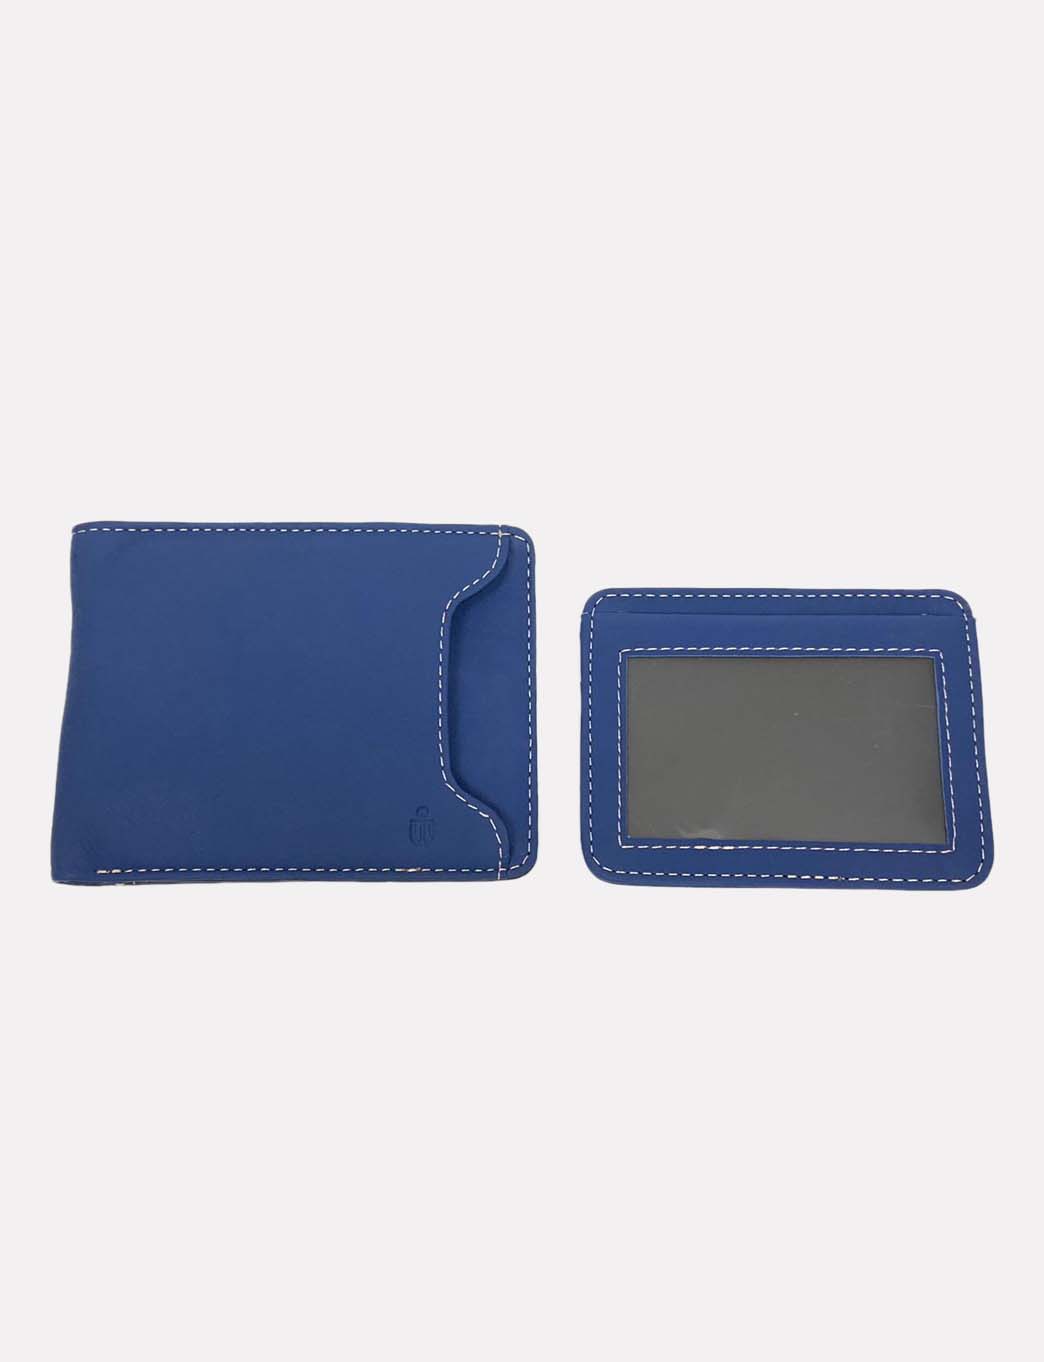 2 in 1 lamb leather wallet with cardholder (Blue, Black and Brown)